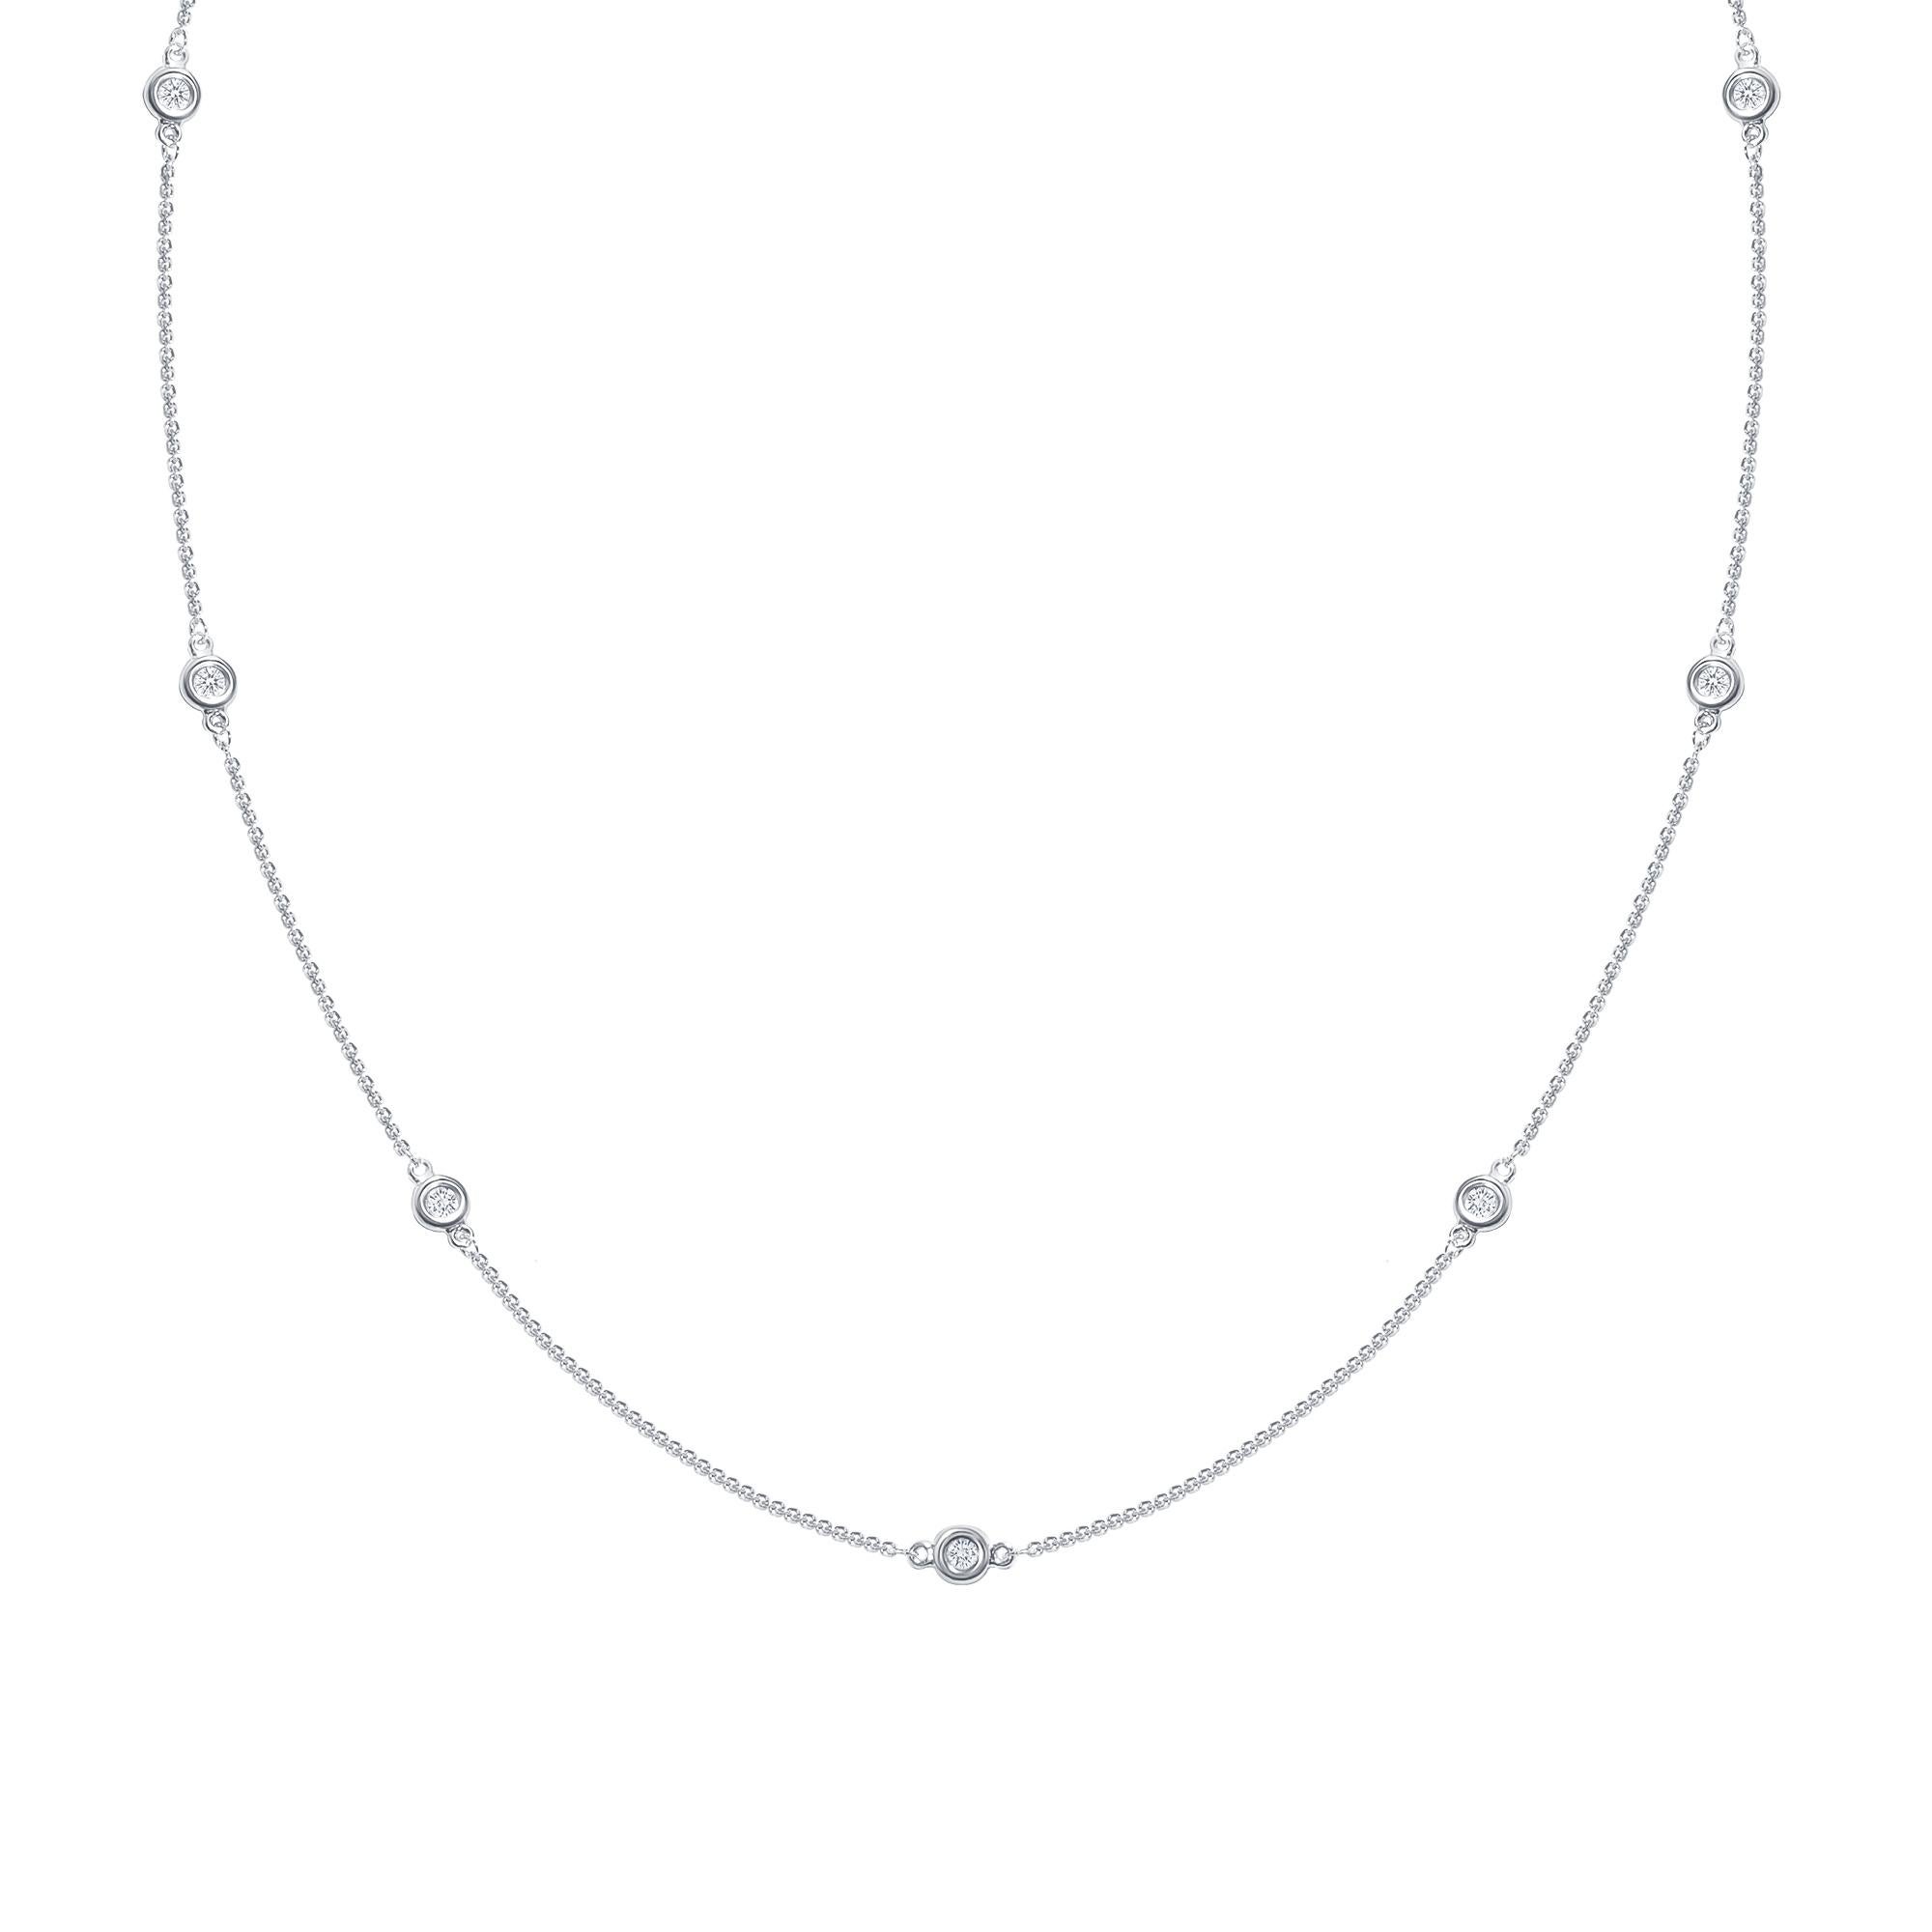 Eight elegant round diamonds set in a bezel setting along a 14k gold chain necklace.

Gold: 14K Gold
Number of Diamonds: Eight
Gold Color: White Gold
Carat: 1 Carats
Necklace Length: 16 Inches
Diamond Clarity: VS
Diamond Color: F
Chain Type: